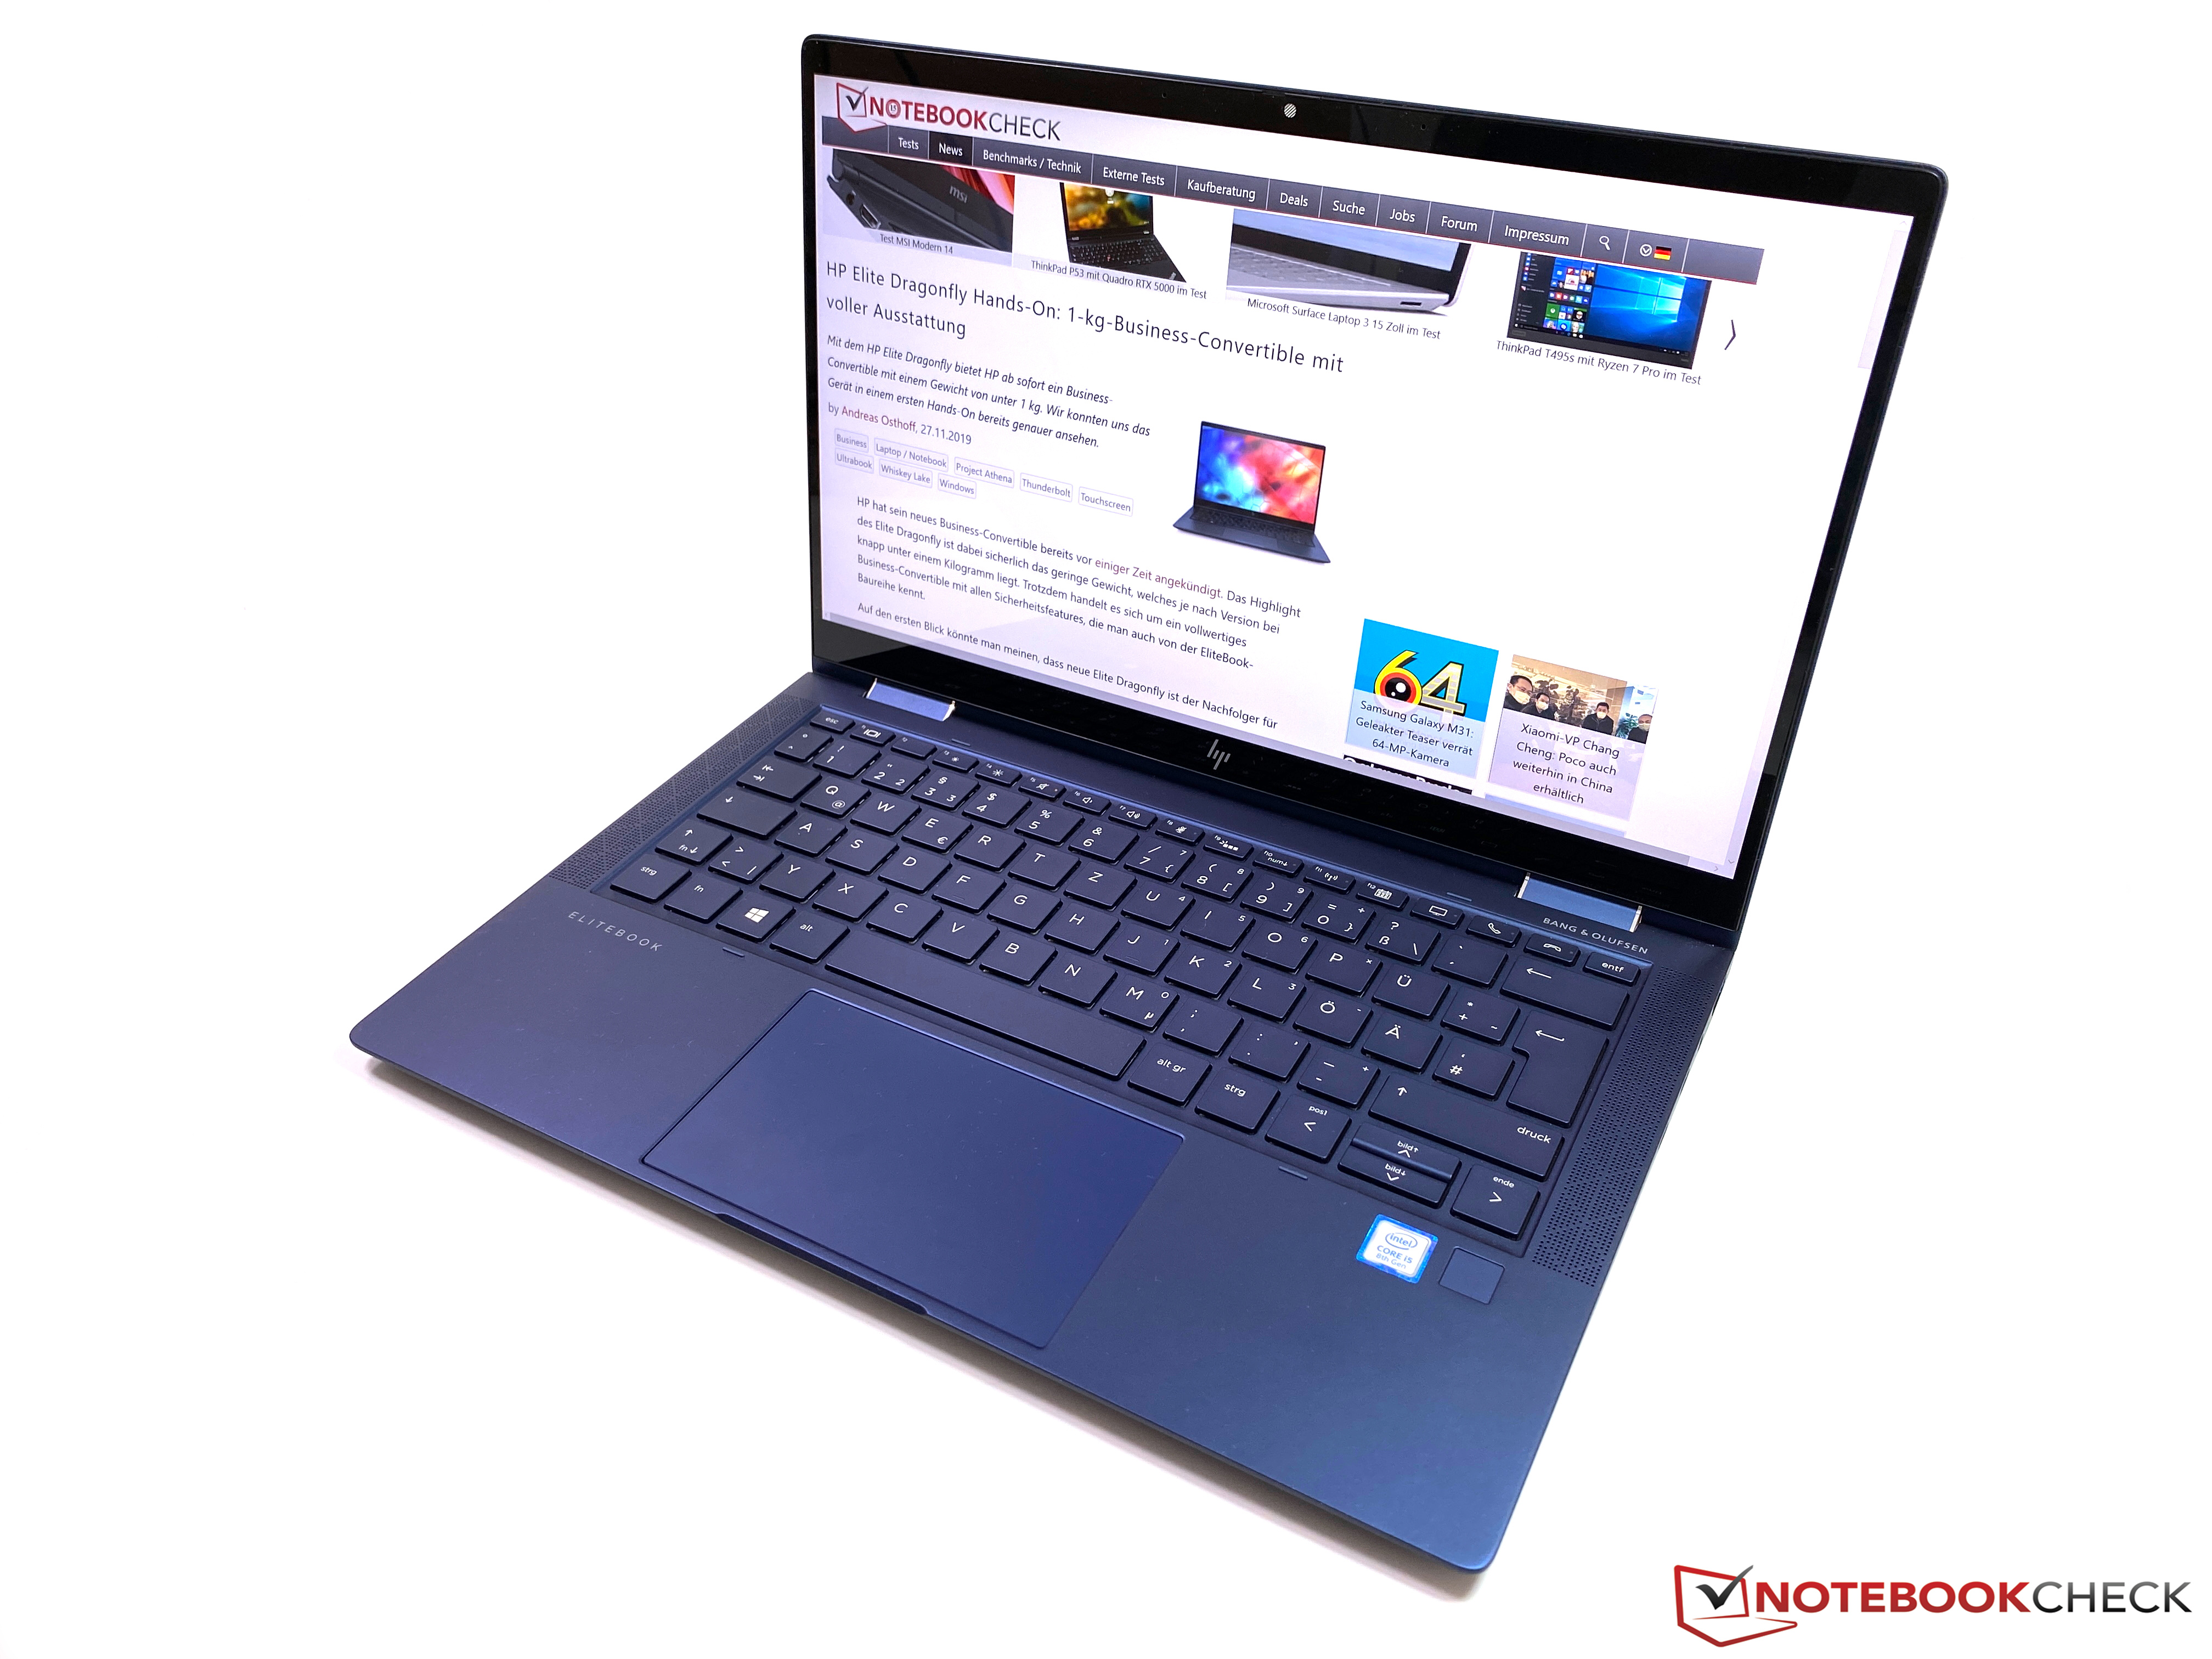 HP Elite Dragonfly Business-Convertible Review: Lighter than 1 kg ...